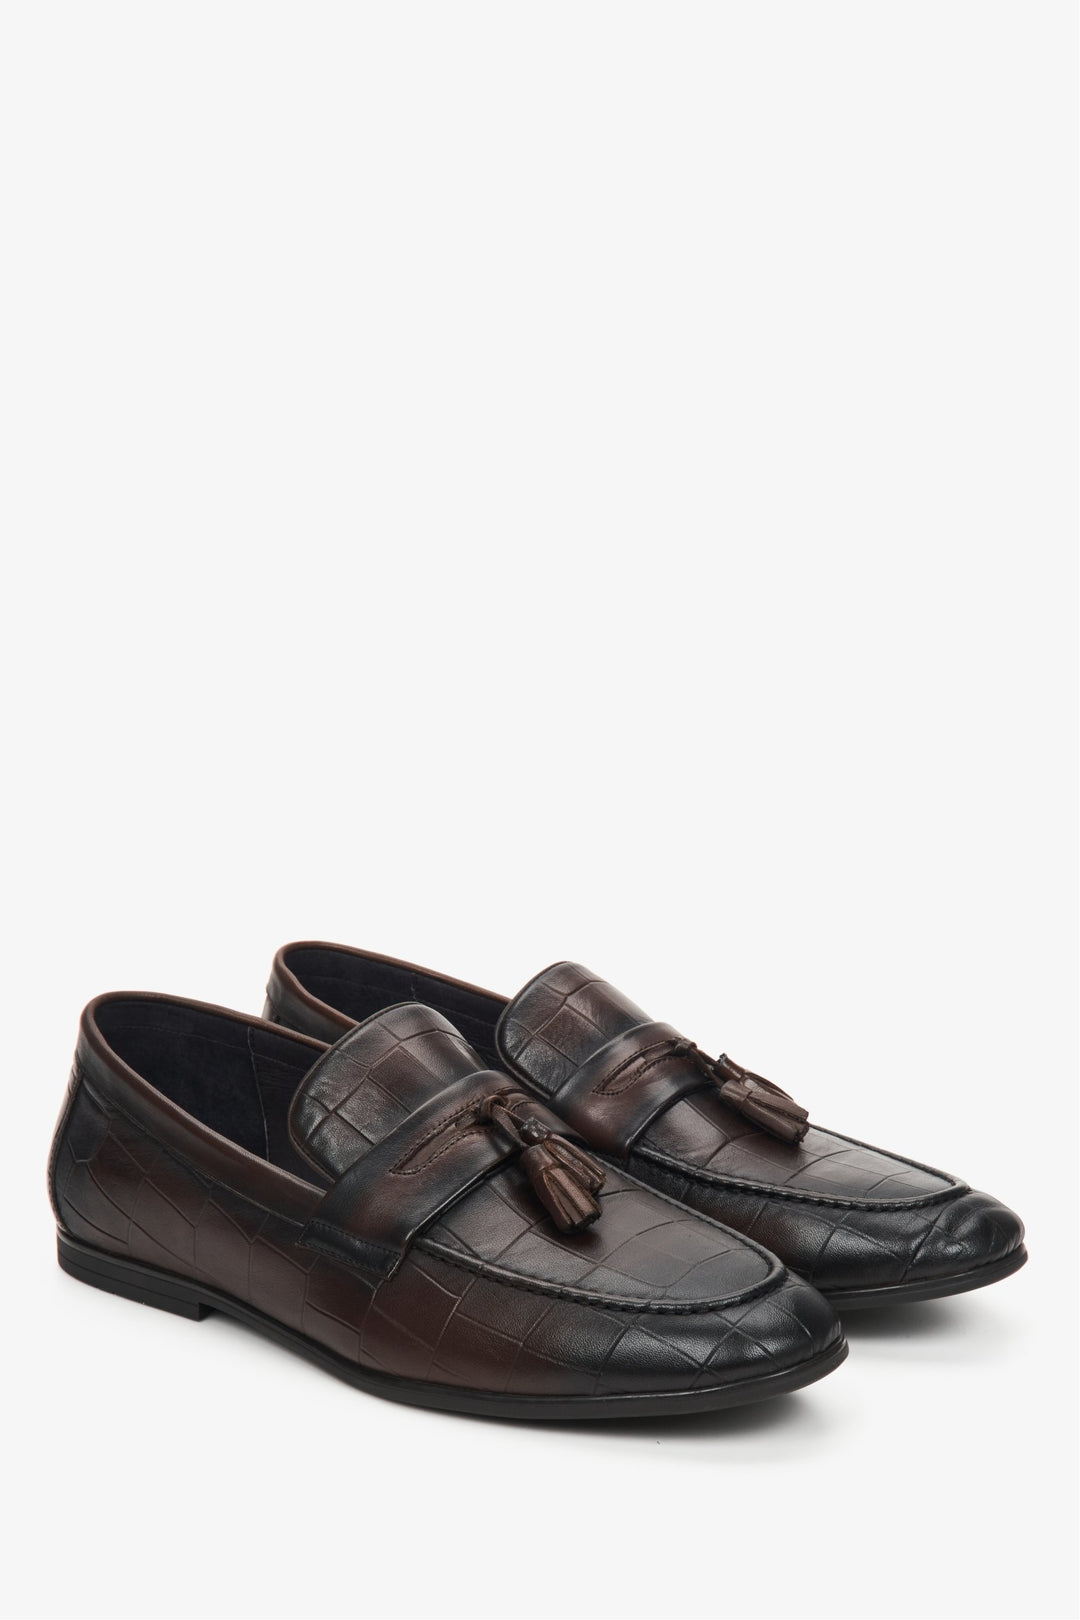 Men's dark brown slip-on loafers made of genuine leather by Estro.